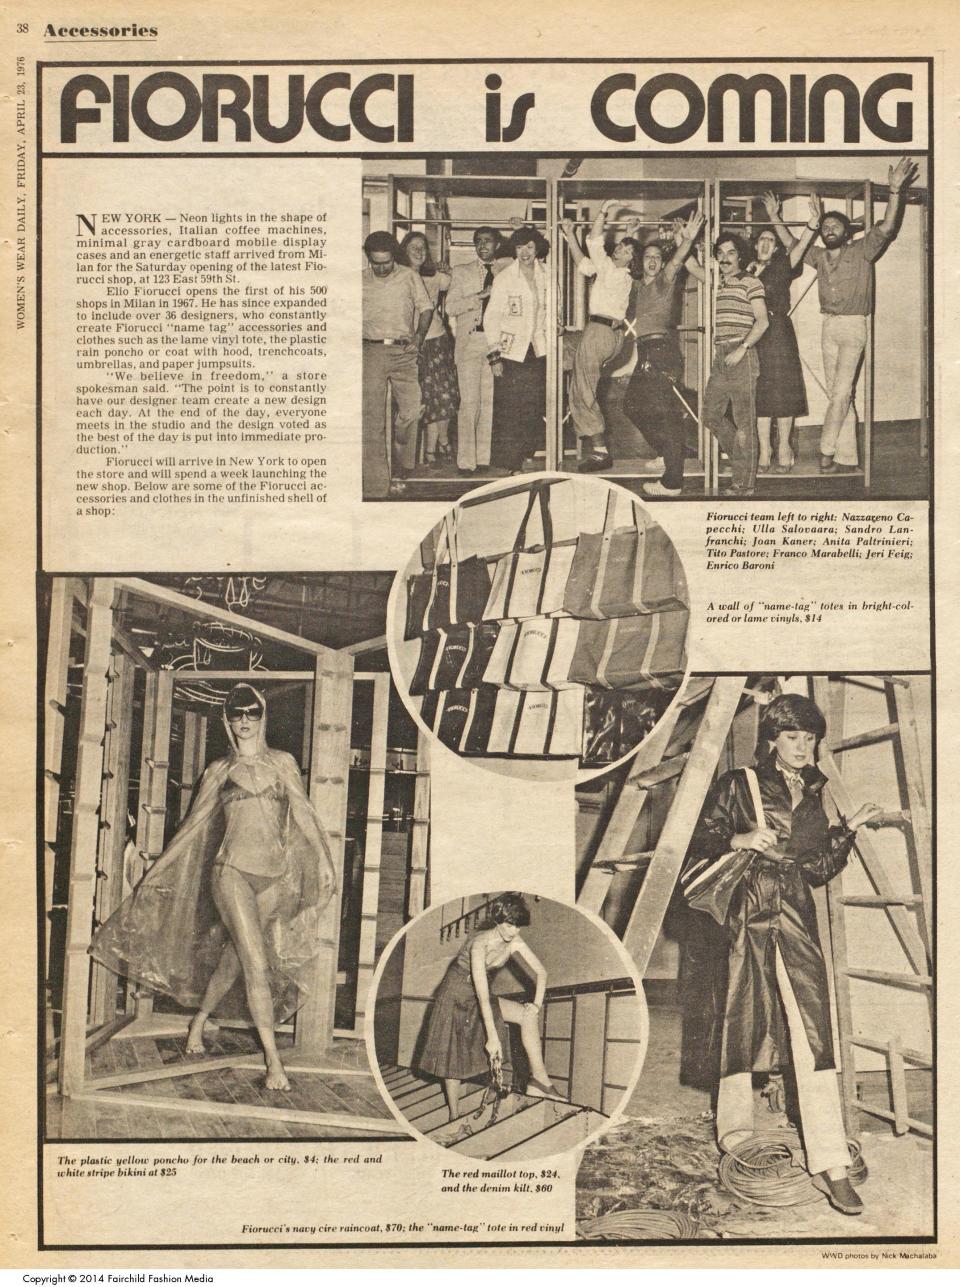 A WWD report about the opening of the Fiorucci store in New York, 1976.